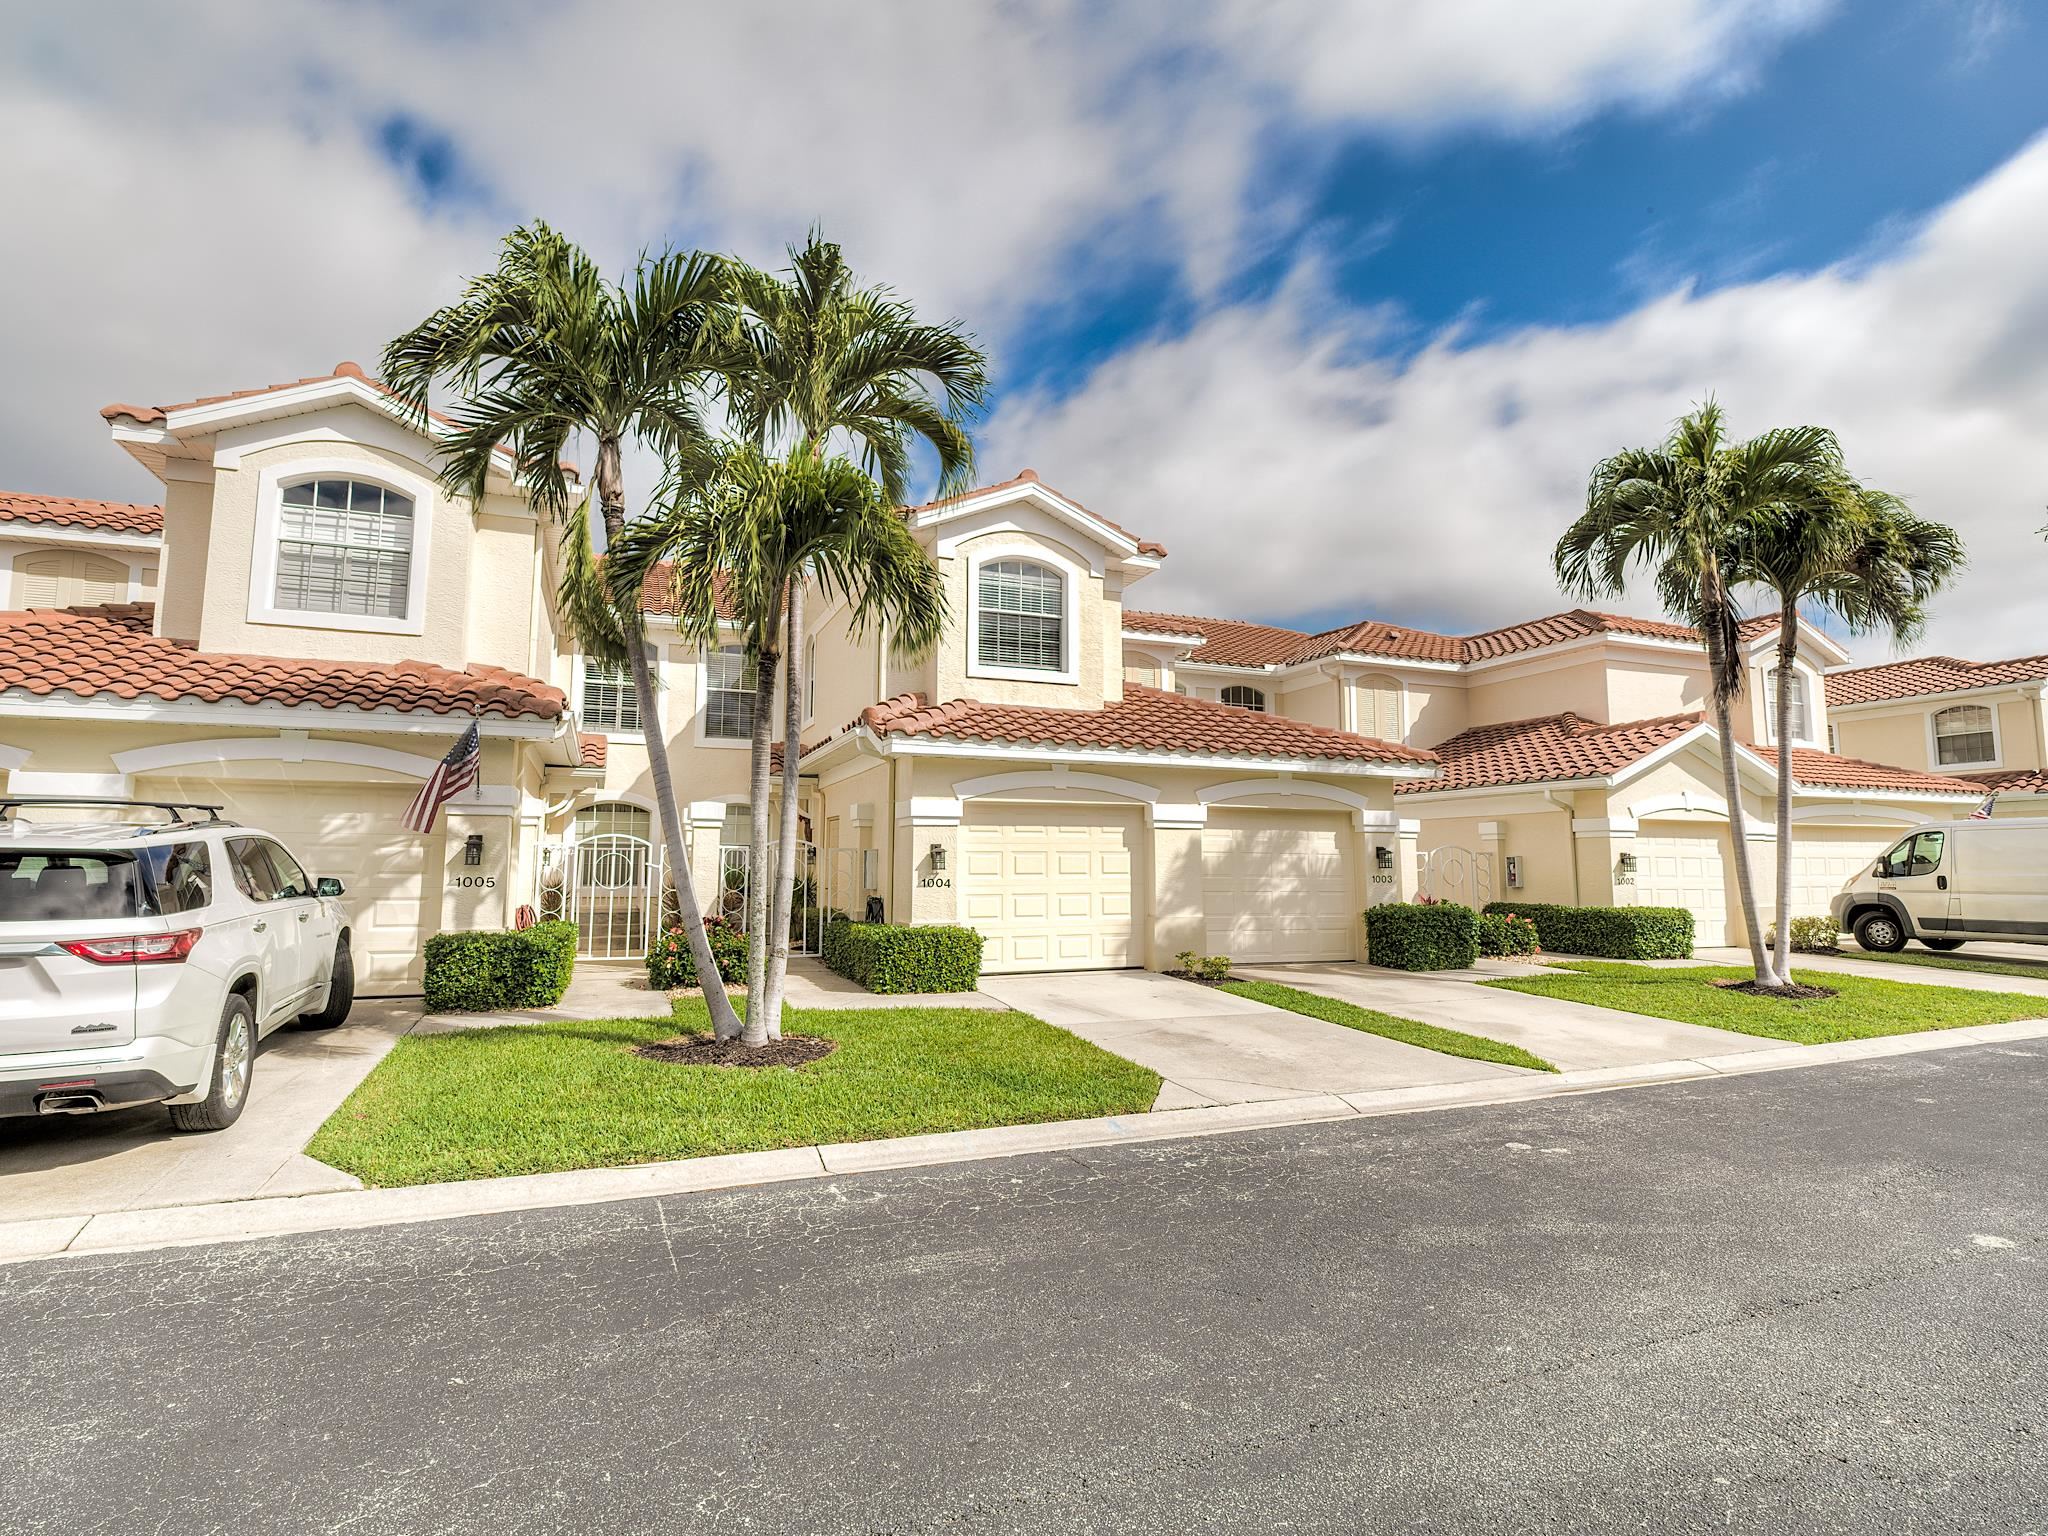 15081 Tamarind Cay Ct, Fort Myers, Florida 33908, 3 Bedrooms Bedrooms, ,2 BathroomsBathrooms,Condo,For Sale,Tamarind Cay Ct,2240160